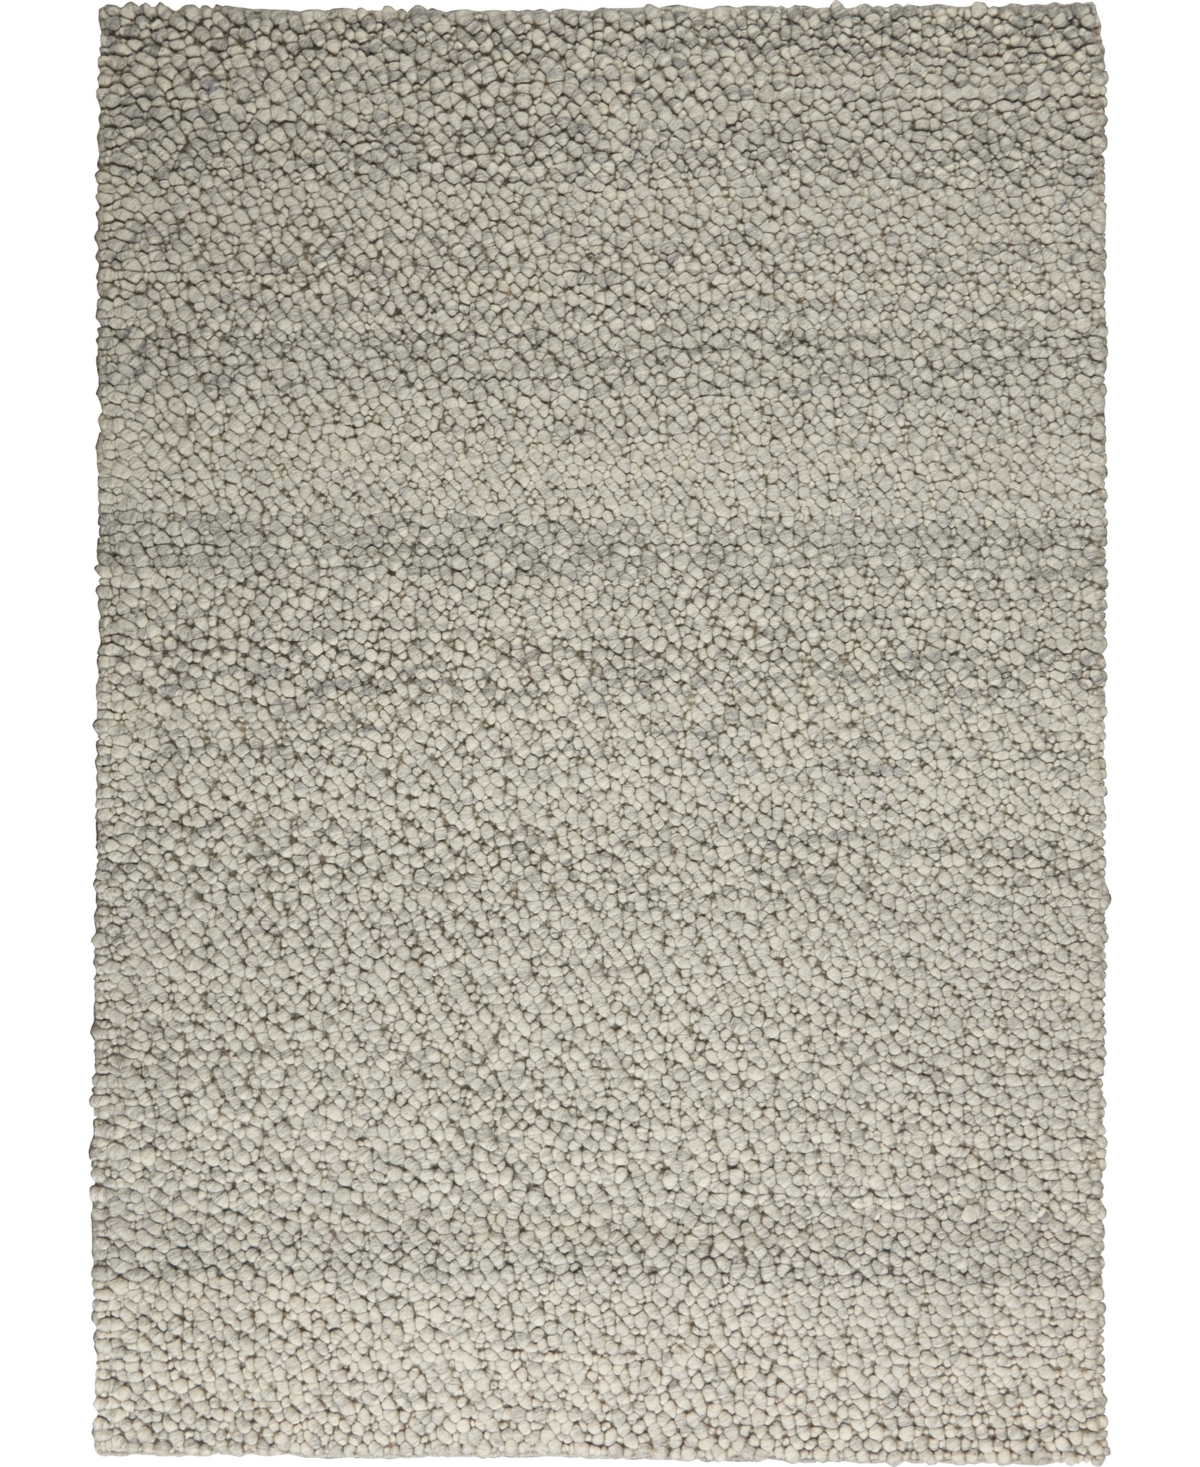 Calvin Klein Ck940 Riverstone Gray And Ivory 4' X 6' Area Rug In Grey,ivory